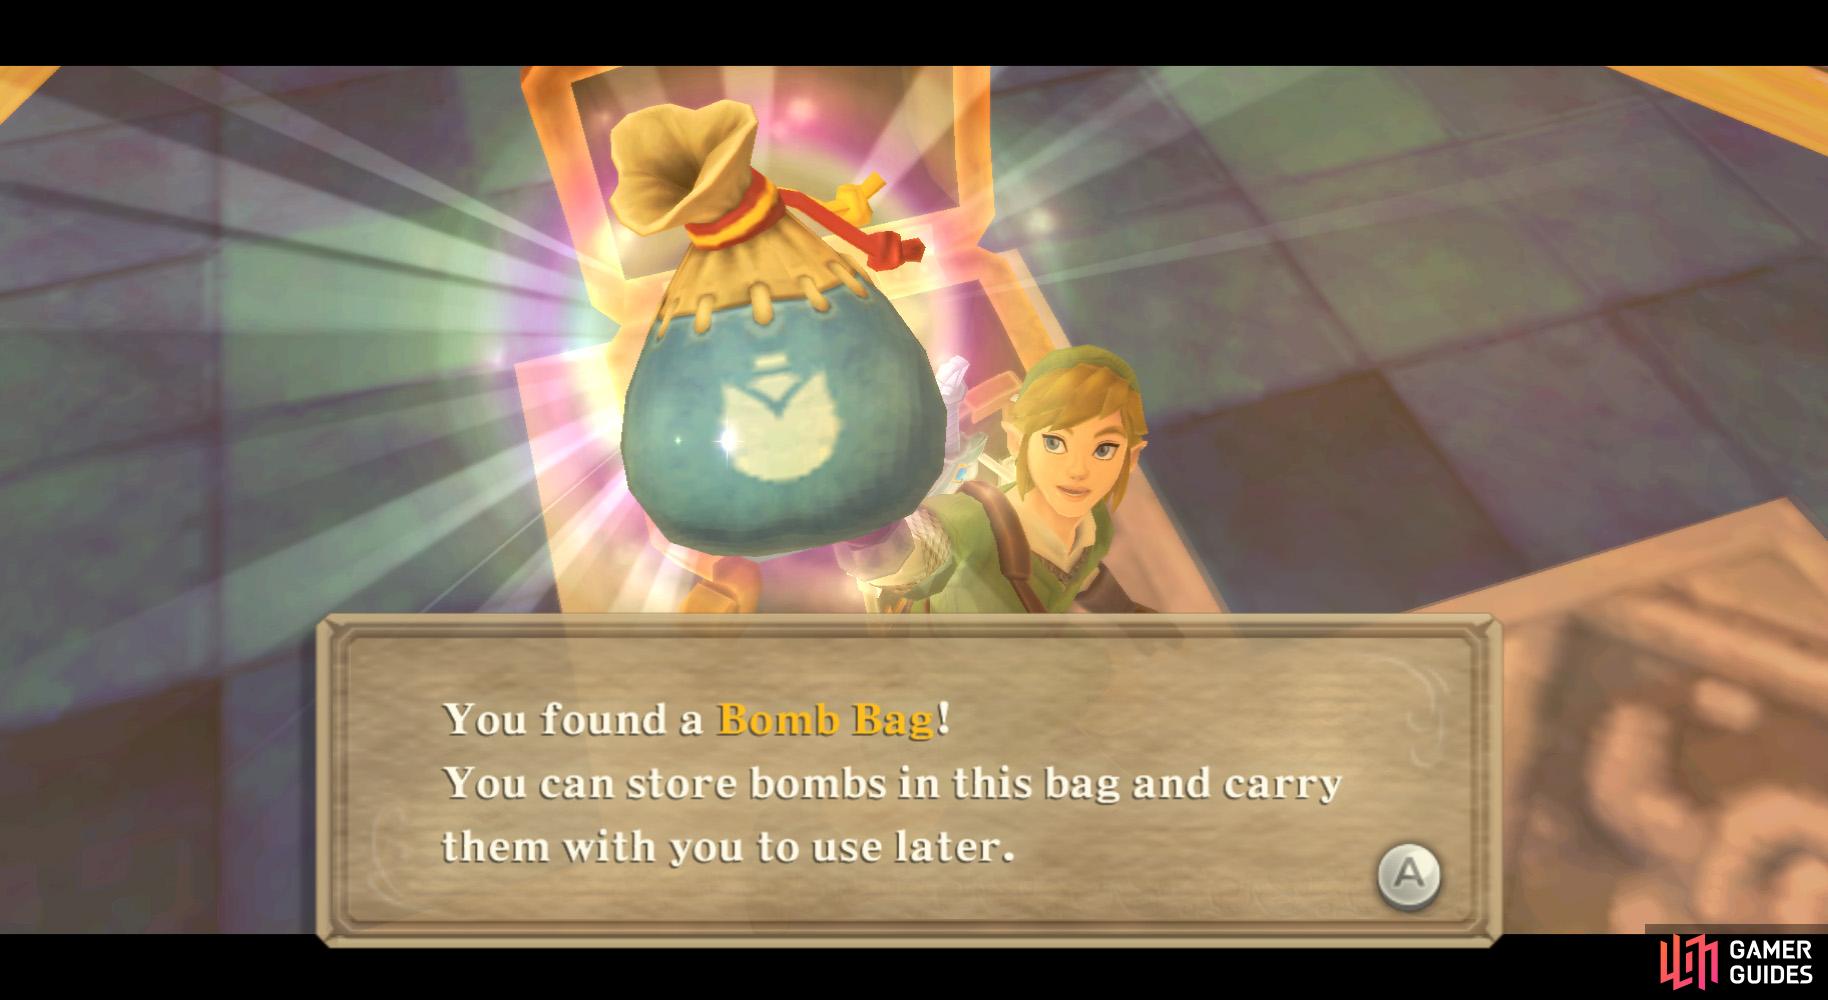 You'll find the Bomb Bag inside the second dungeon.